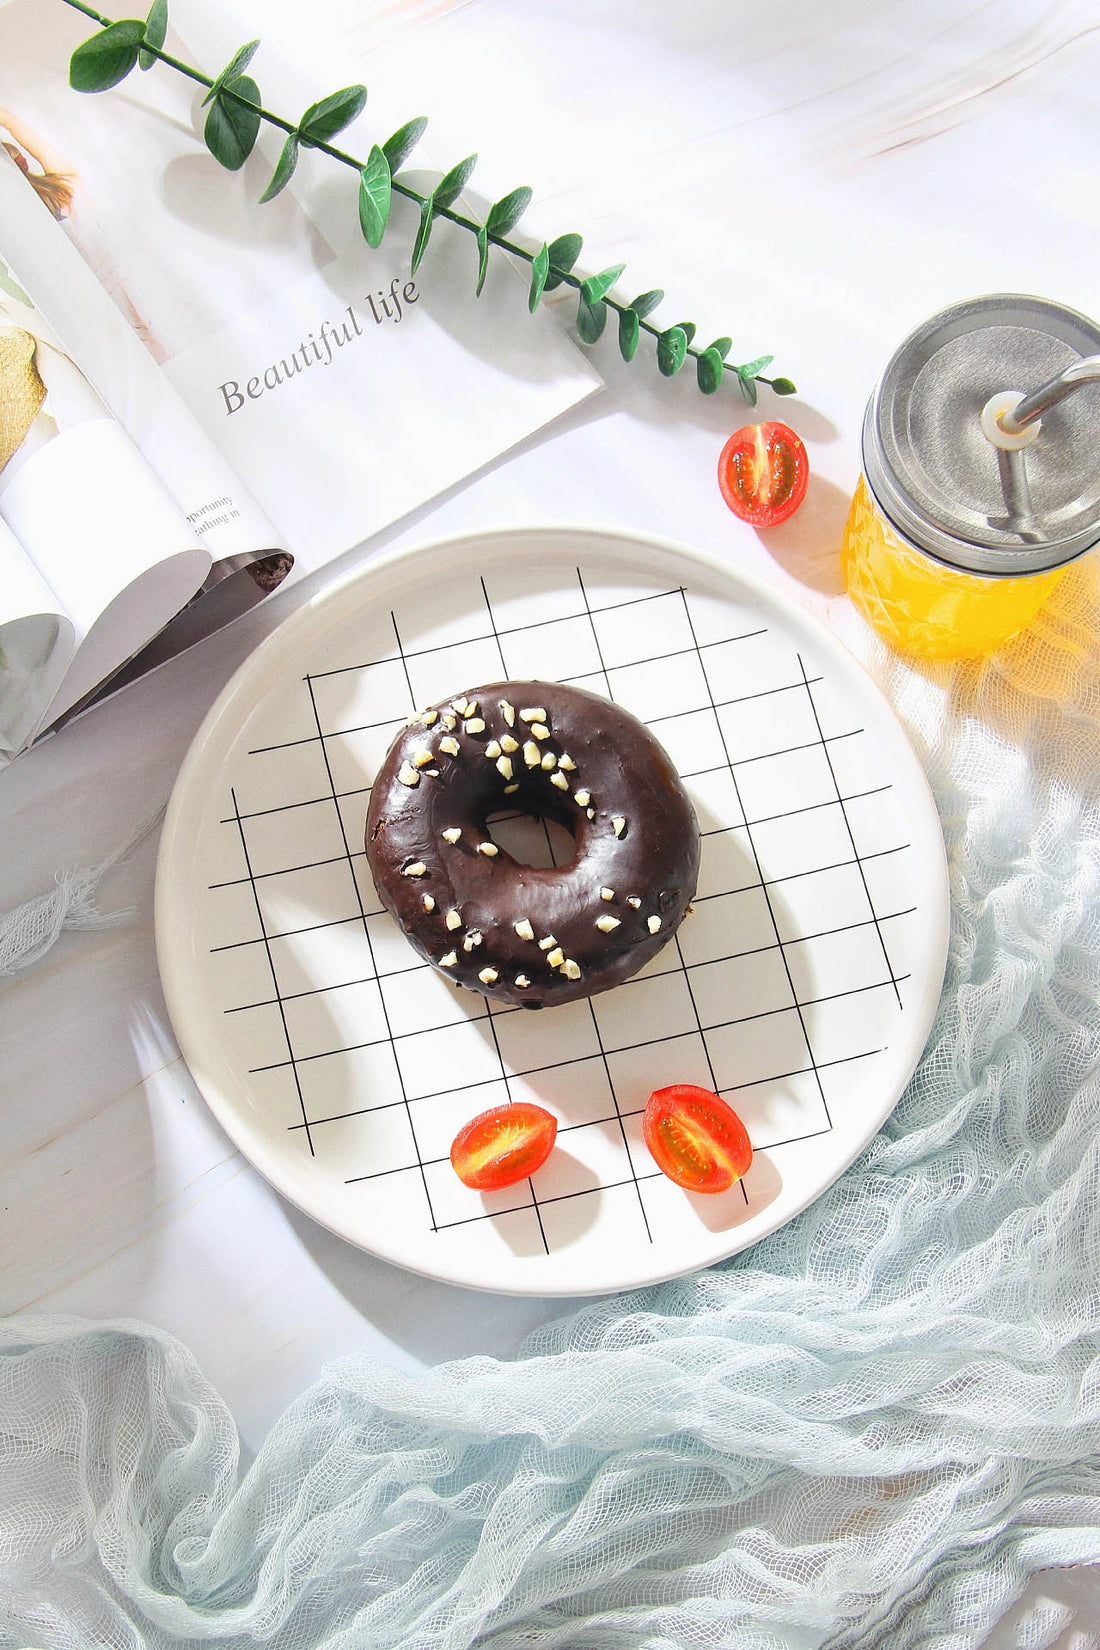 How many calories are in a donut? How can I burn calories?